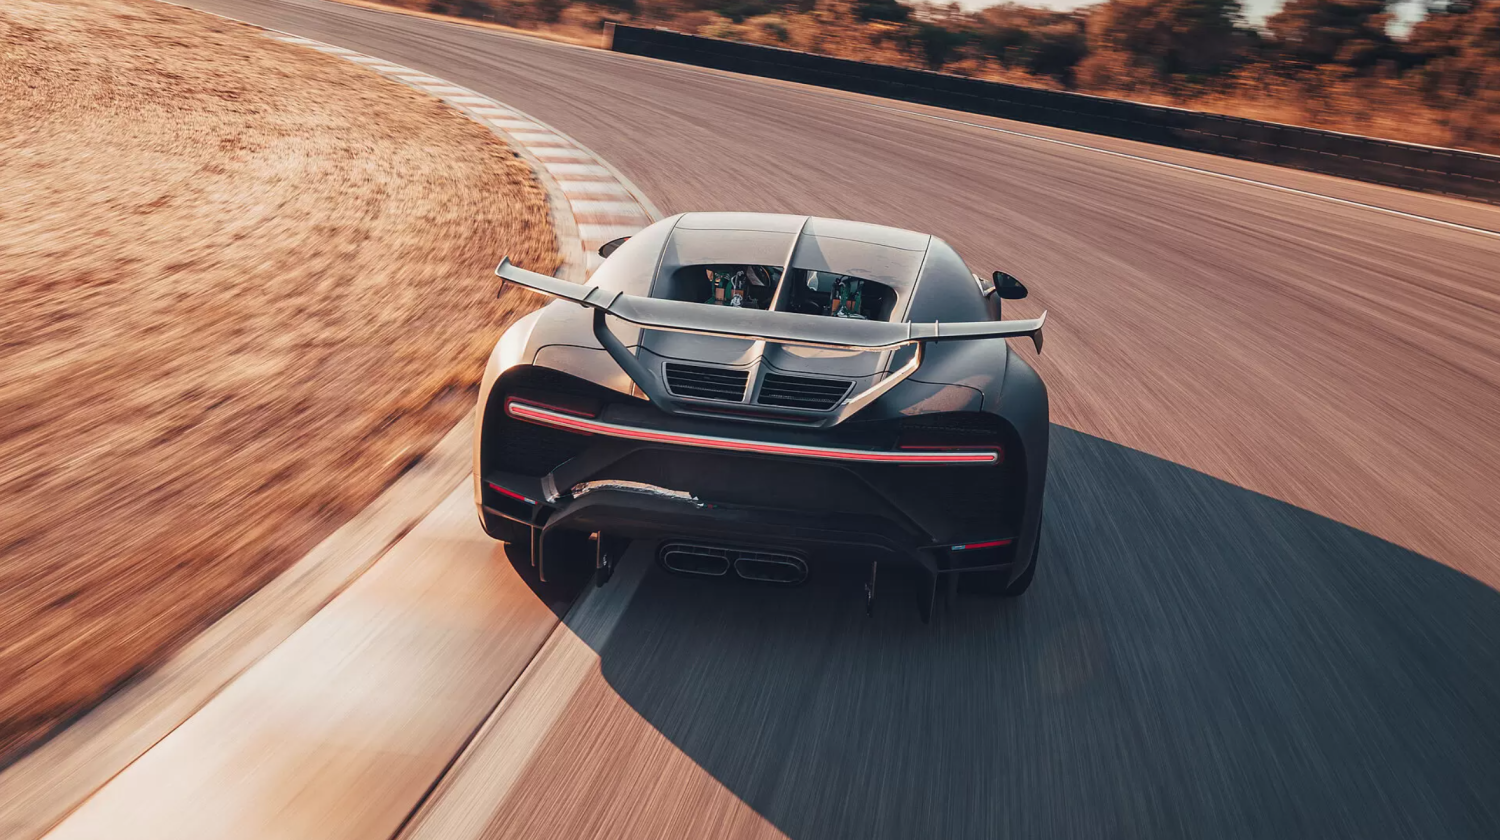 Why Wouldn't You Want To Watch A Bugatti Chiron Pur Sport Catching Air?